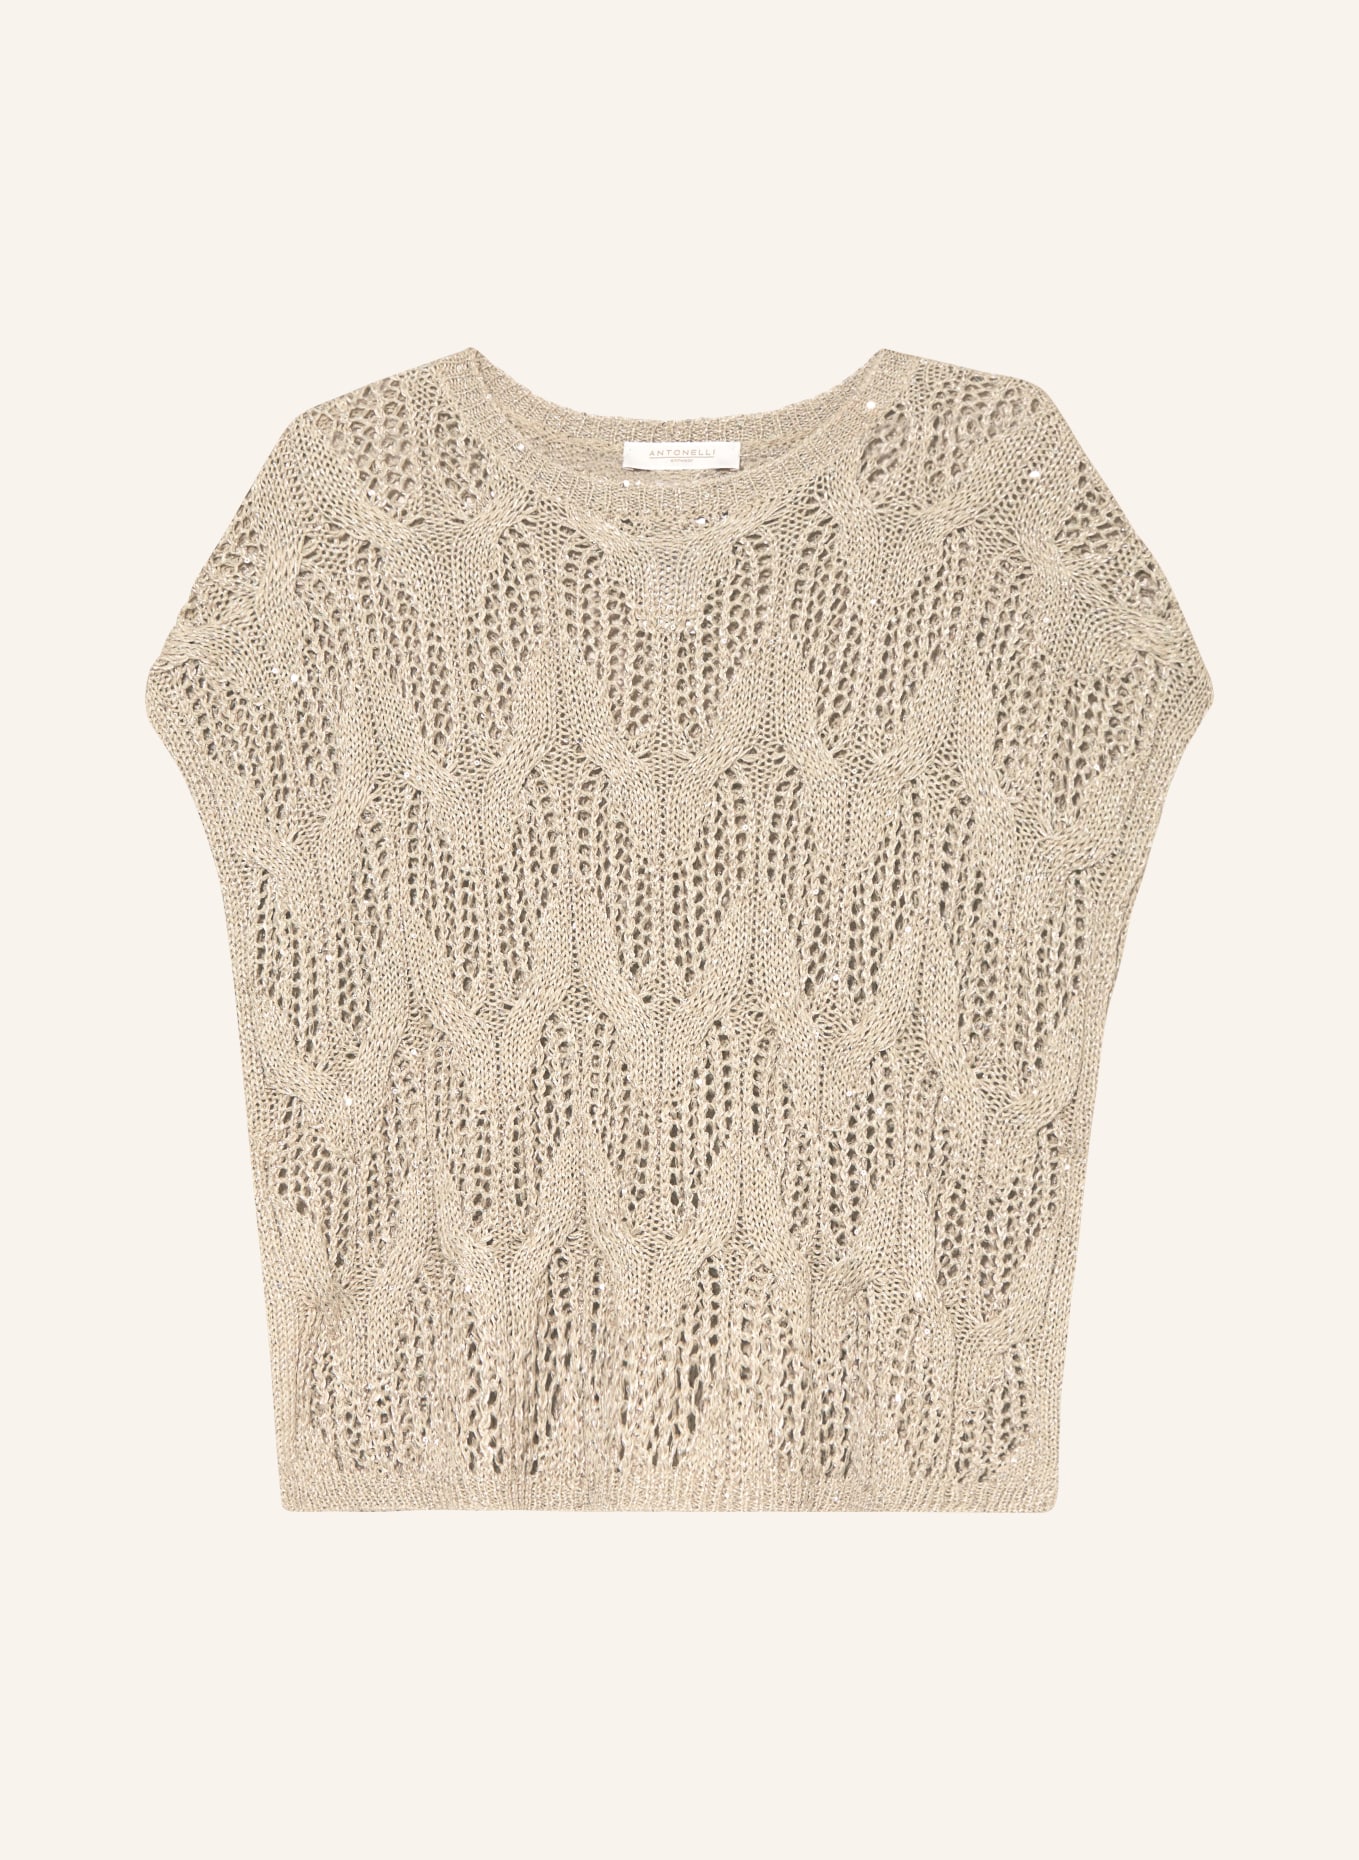 ANTONELLI firenze Knit shirt ITALICO with sequins, Color: BEIGE (Image 1)